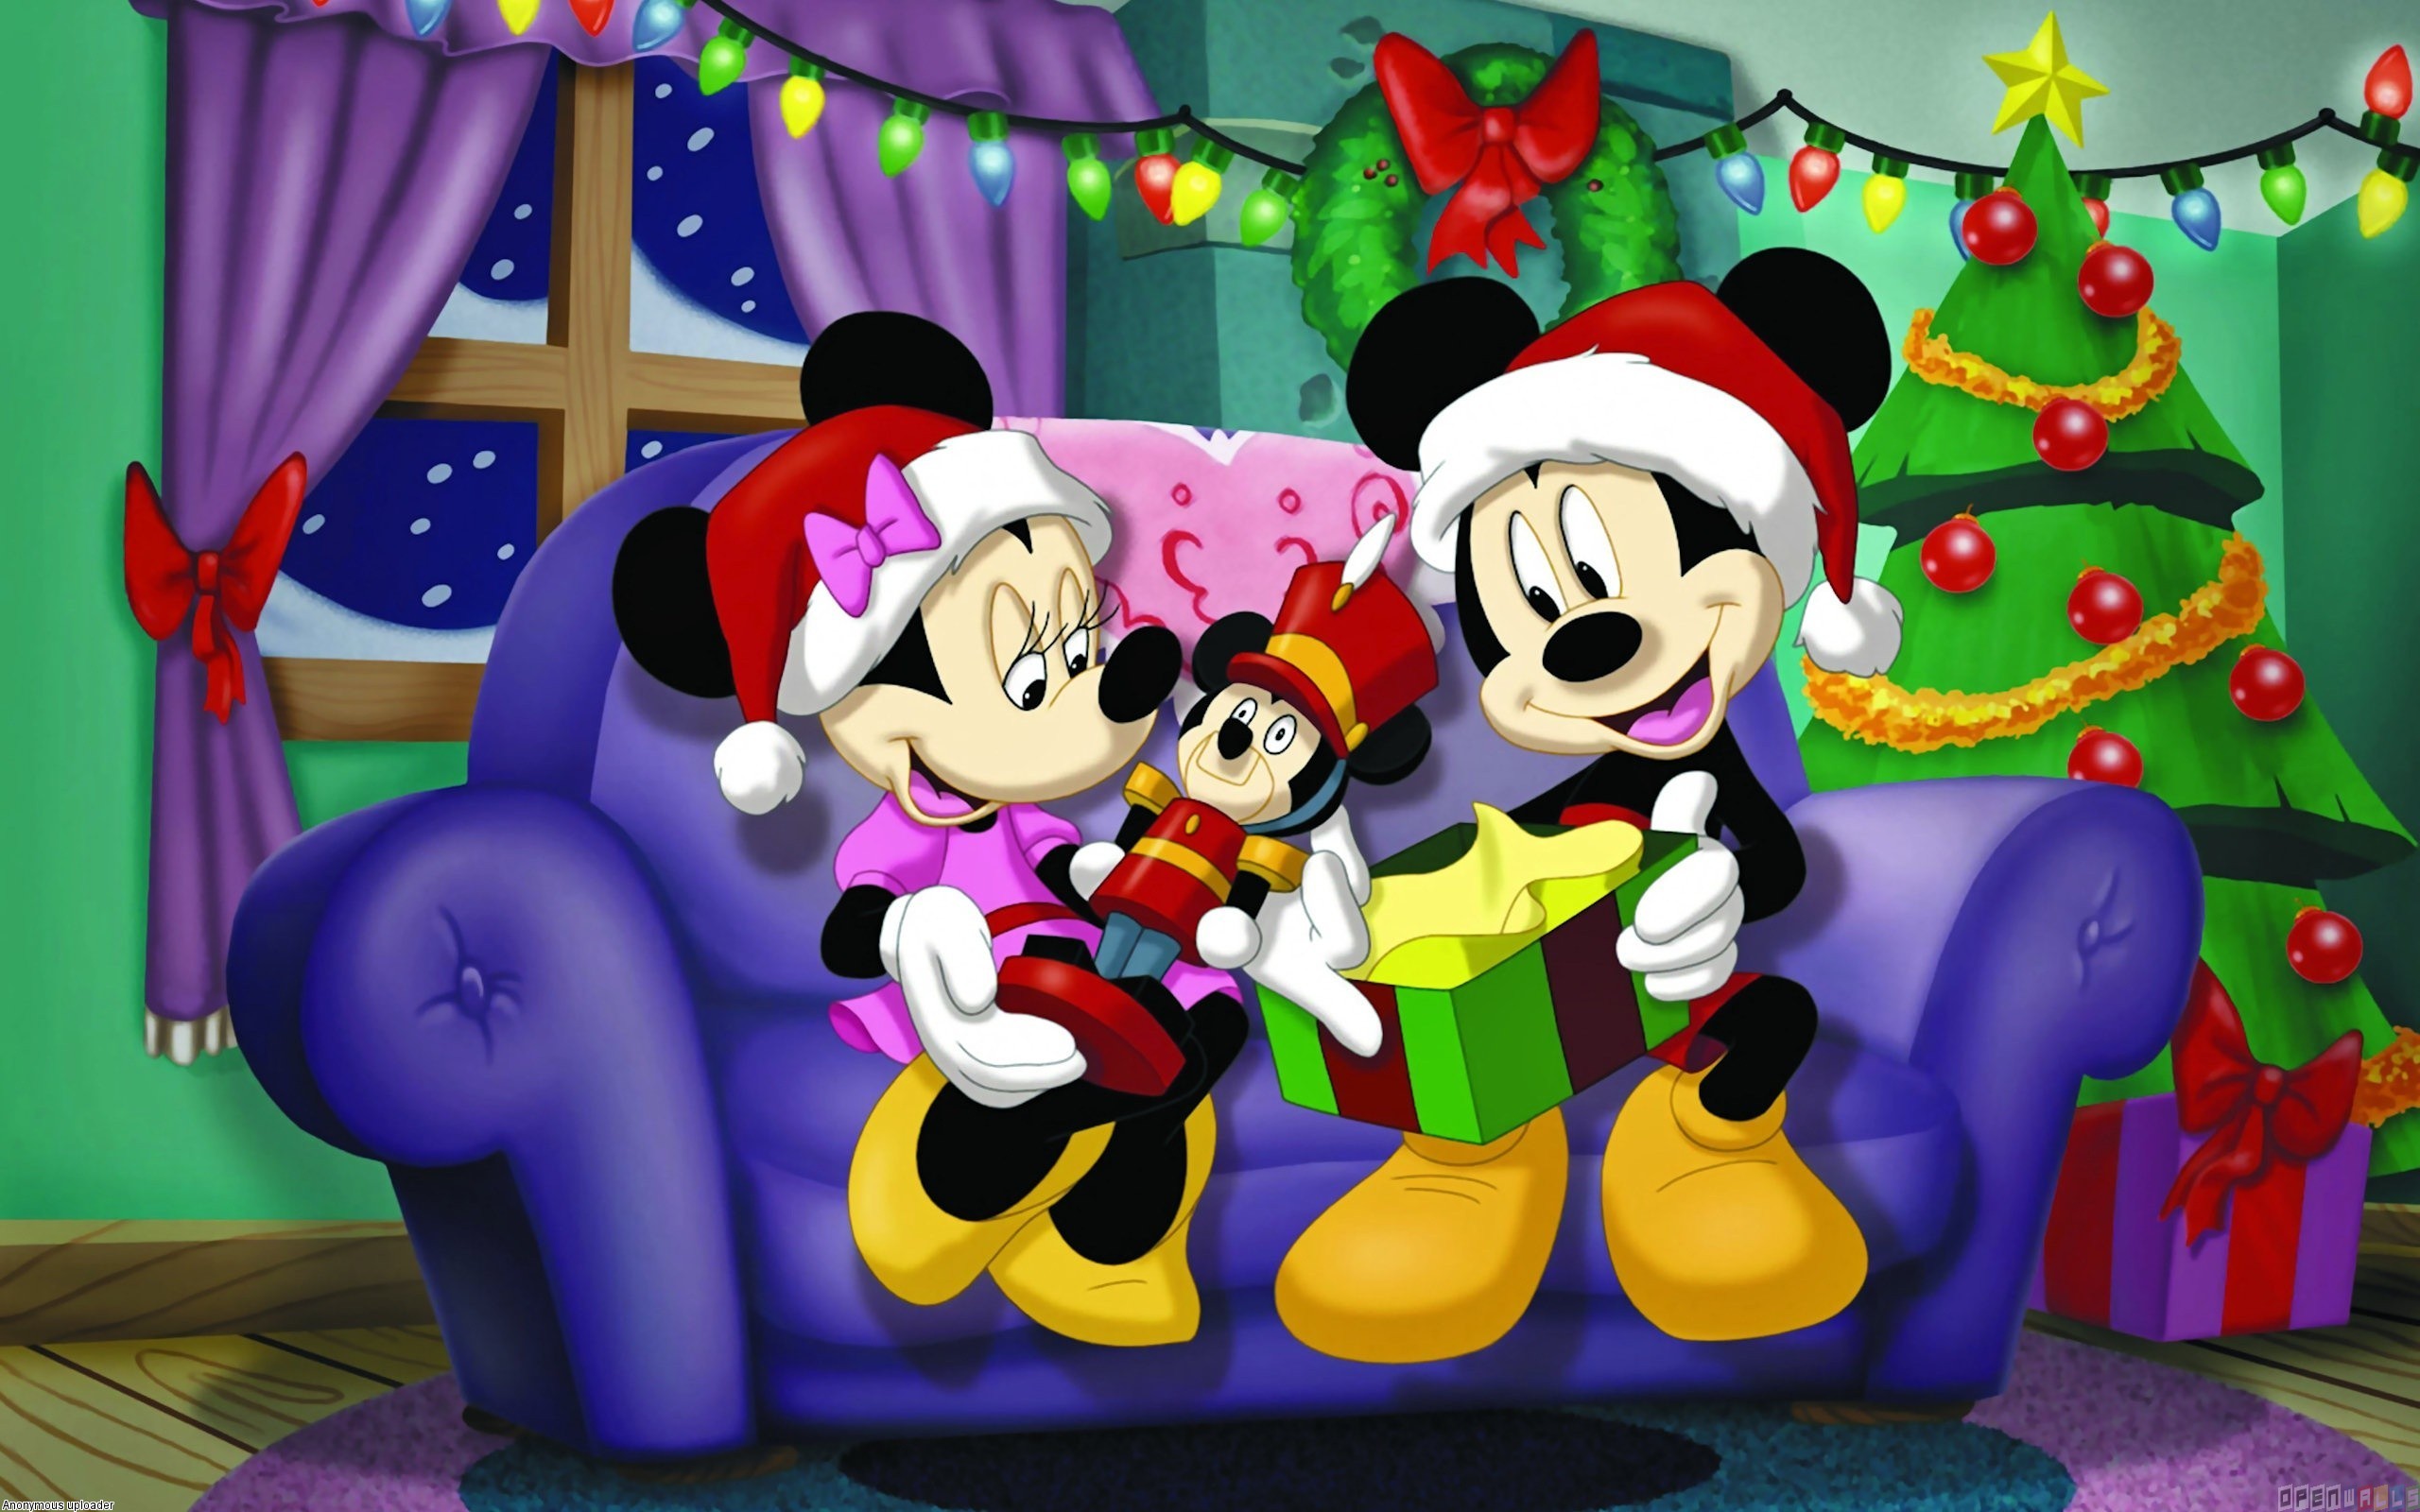 Mickey-Mouse-and-Minnie-Mouse-Christmas gifts-Desktop-Background-2560x1600 : Wallpapers13.com